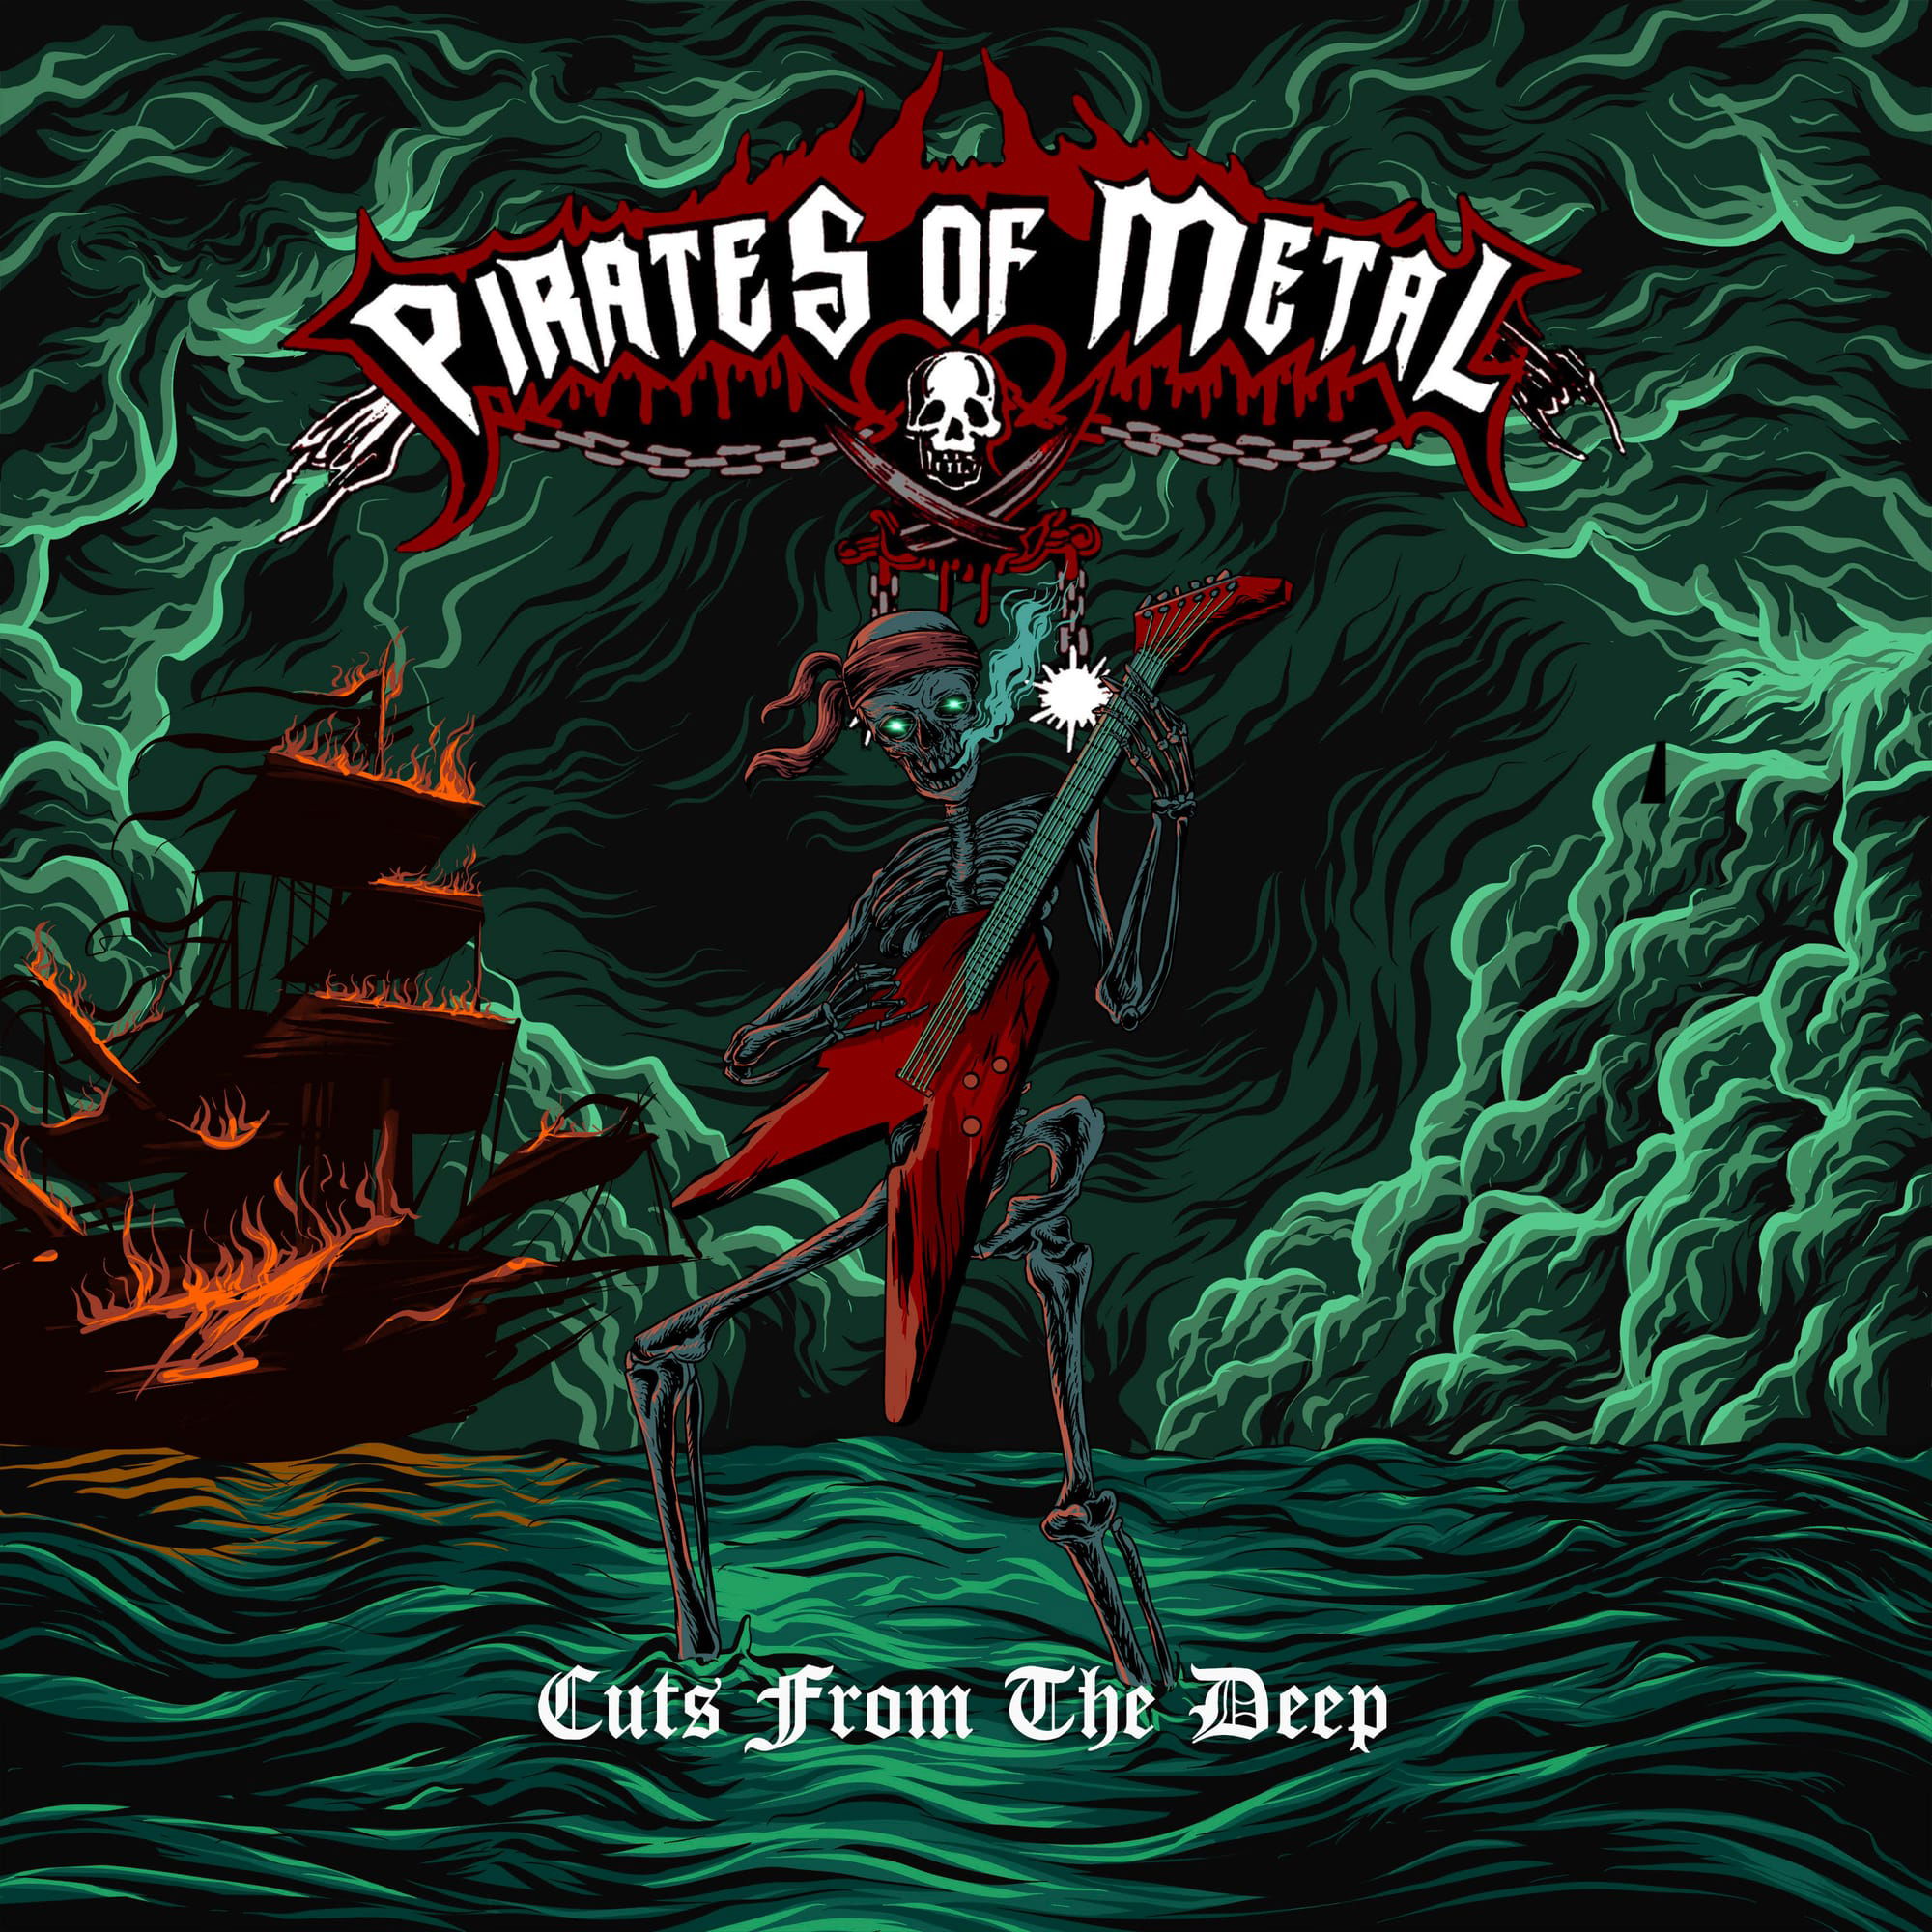 Interview with PIRATES OF METAL